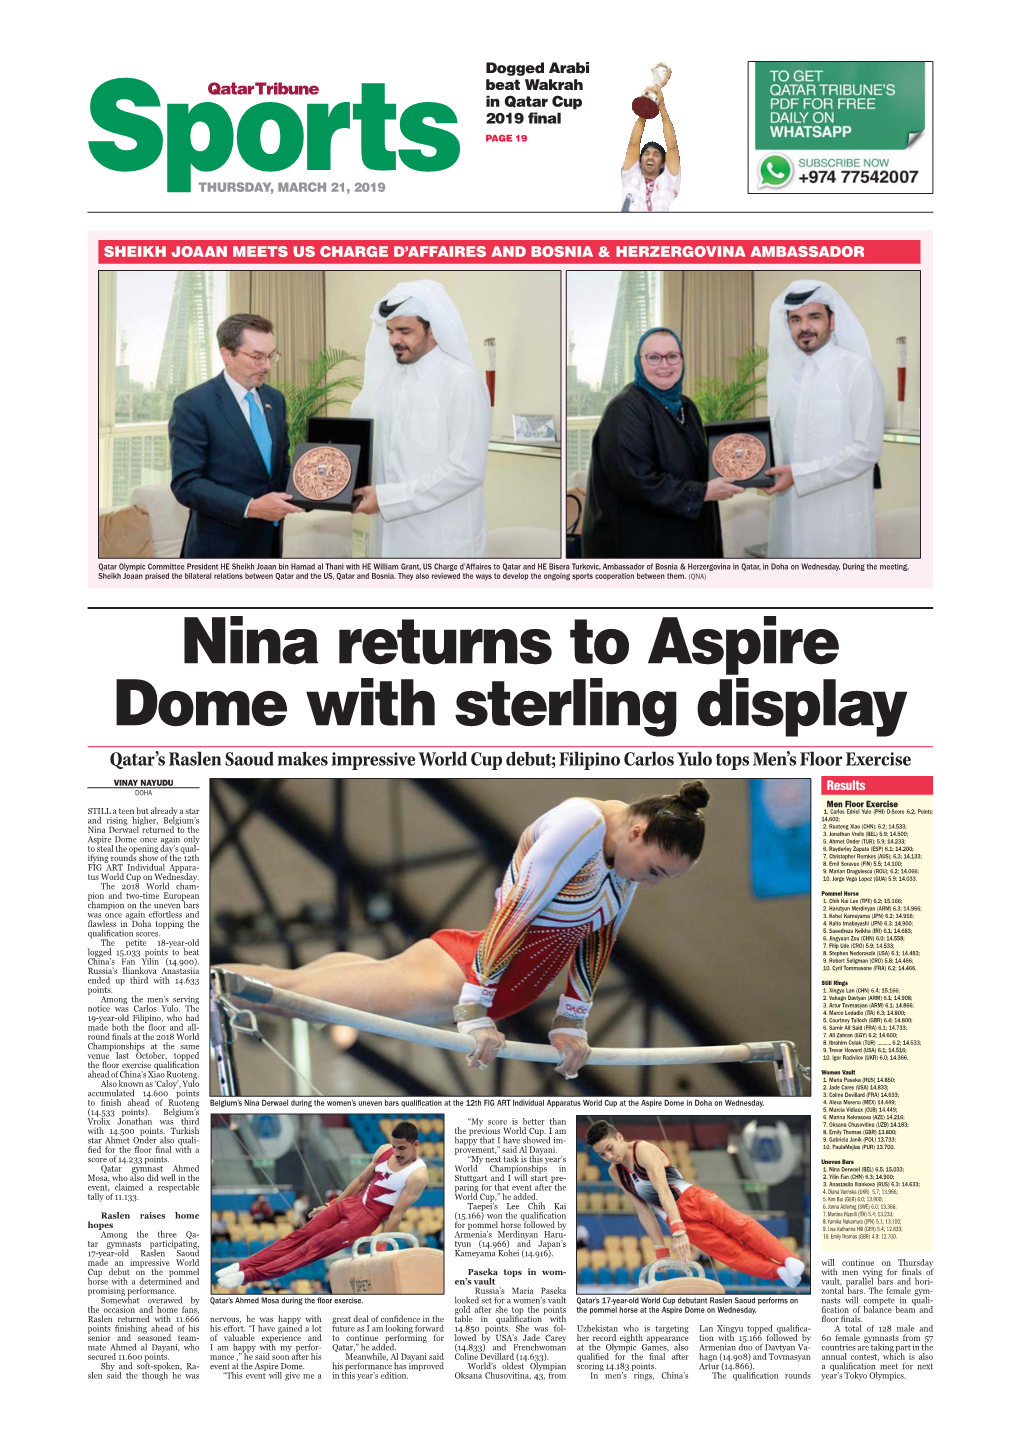 Nina Returns to Aspire Dome with Sterling Display